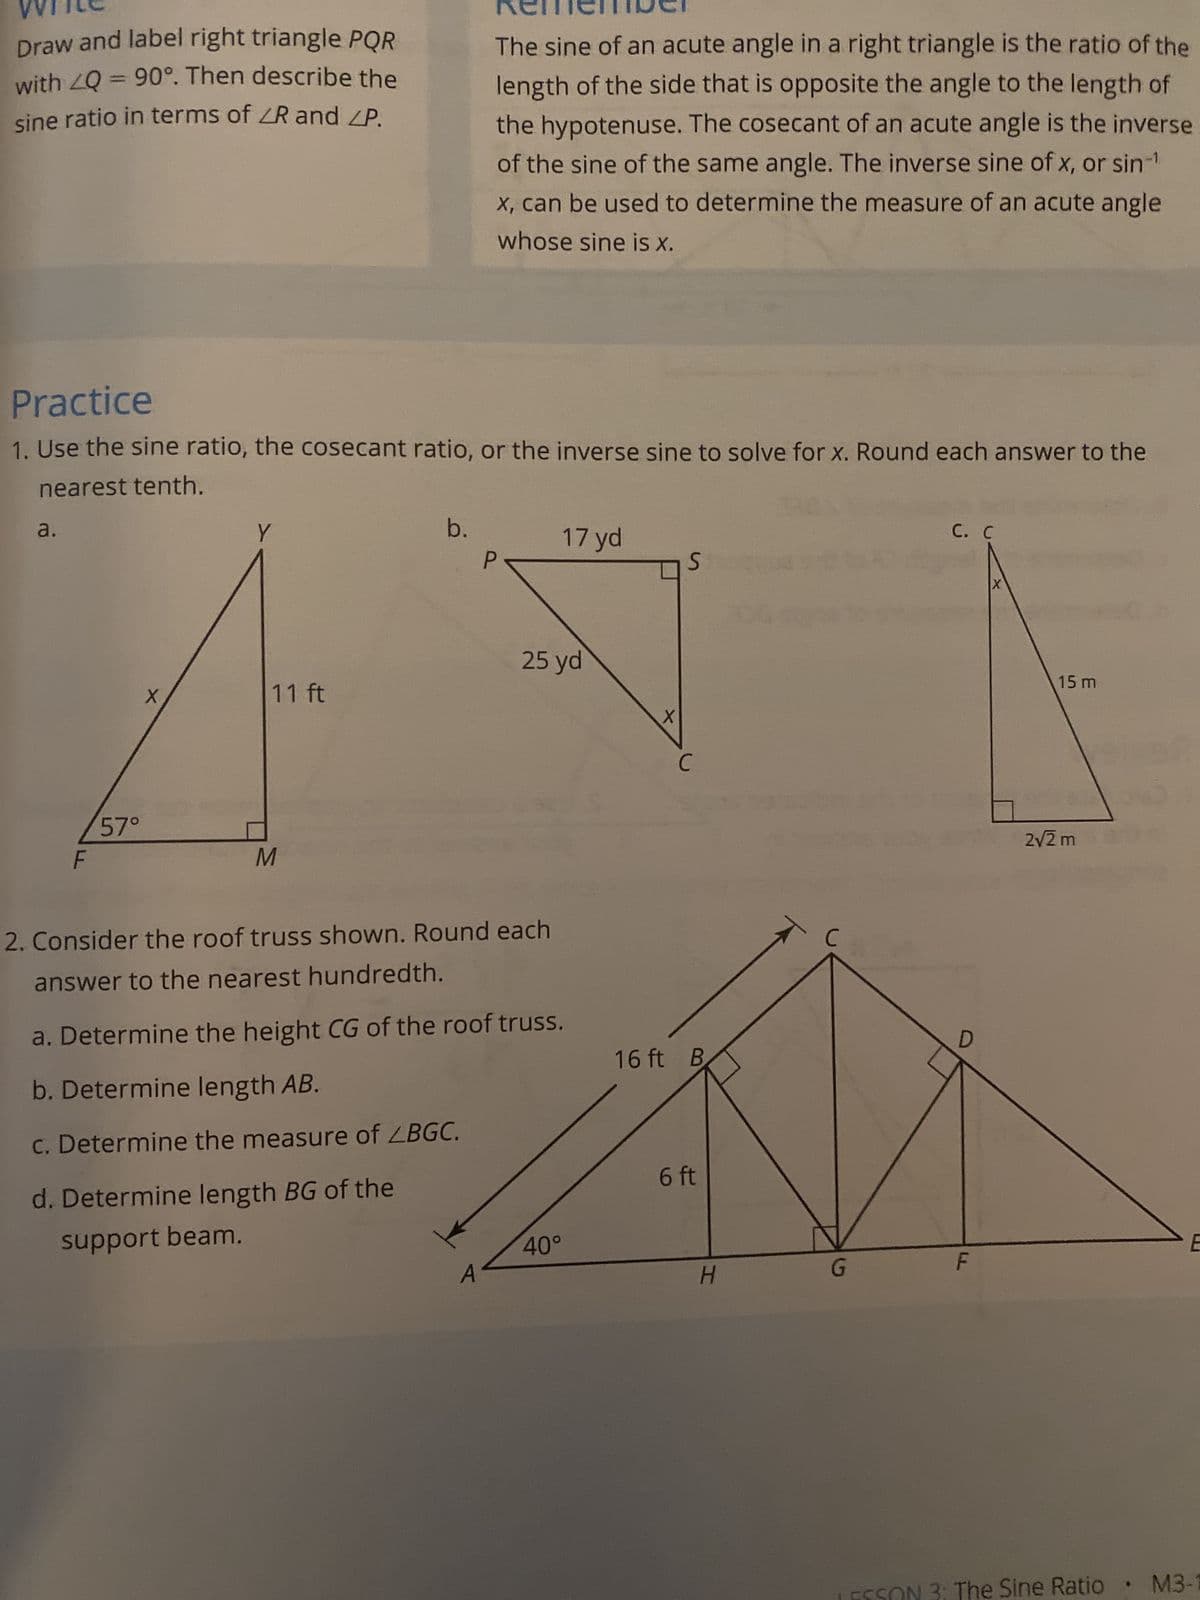 Draw and label right triangle PQR
with LQ = 90°. Then describe the
sine ratio in terms of ZR and ZP.
Practice
1. Use the sine ratio, the cosecant ratio, or the inverse sine to solve for x. Round each answer to the
nearest tenth.
a.
57°
X
Y
11 ft
M
The sine of an acute angle in a right triangle is the ratio of the
length of the side that is opposite the angle to the length of
the hypotenuse. The cosecant of an acute angle is the inverse
of the sine of the same angle. The inverse sine of x, or sin-¹
x, can be used to determine the measure of an acute angle
whose sine is x.
b.
d. Determine length BG of the
support beam.
2. Consider the roof truss shown. Round each
answer to the nearest hundredth.
17 yd
25 yd
a. Determine the height CG of the roof truss.
b. Determine length AB.
c. Determine the measure of LBGC.
40°
X
S
16 ft B
6 ft
H
DG
G
C. C
D
F
X
15 m
2√2 m
20
E
LESSON 3: The Sine Ratio M3-1
•